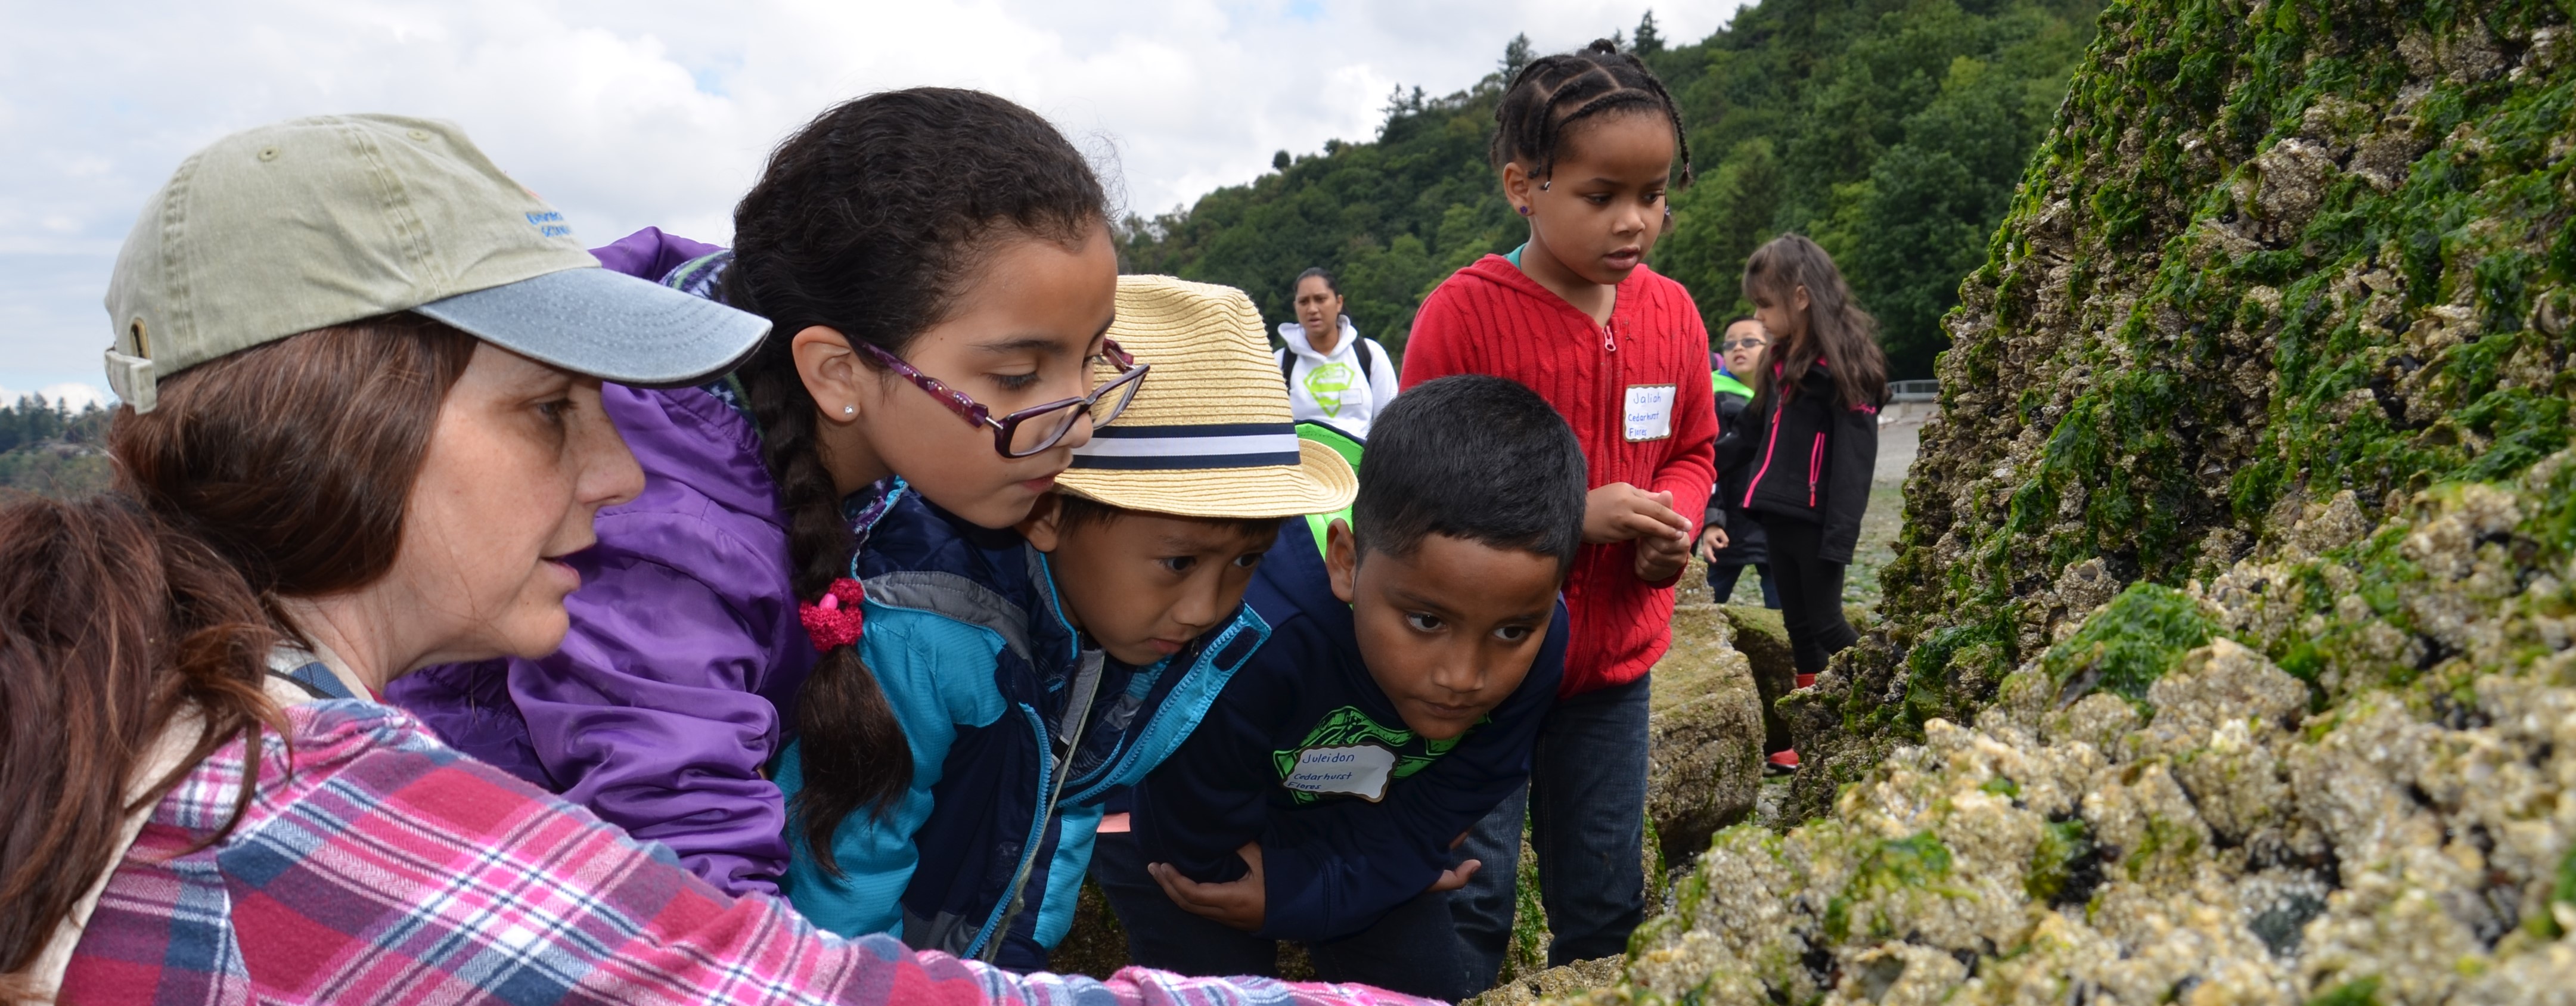 It's your turn to be a Hero! Your gift empowers young scientists to get outside. Donate now through 10/20 and your gift will be matched by a generous donor up to $30,000.